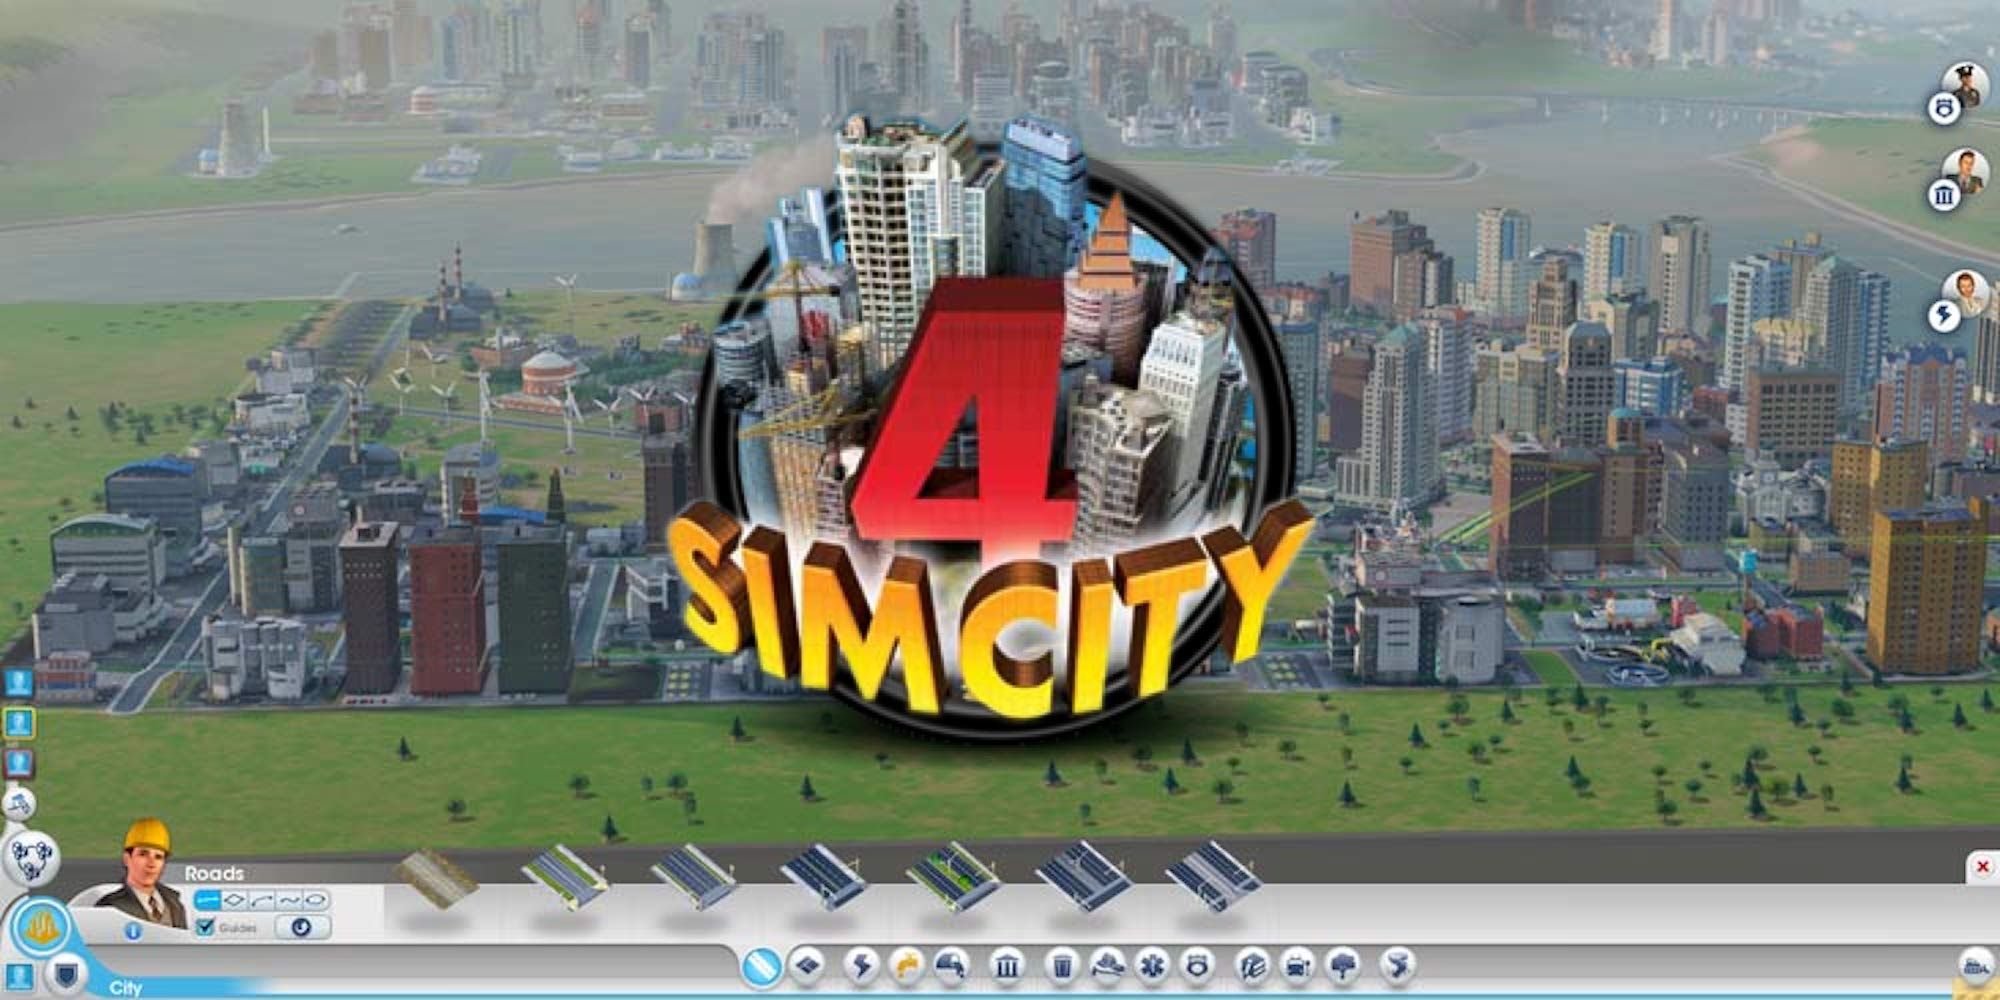 the logo of sim city 4 with some of the interface behind it